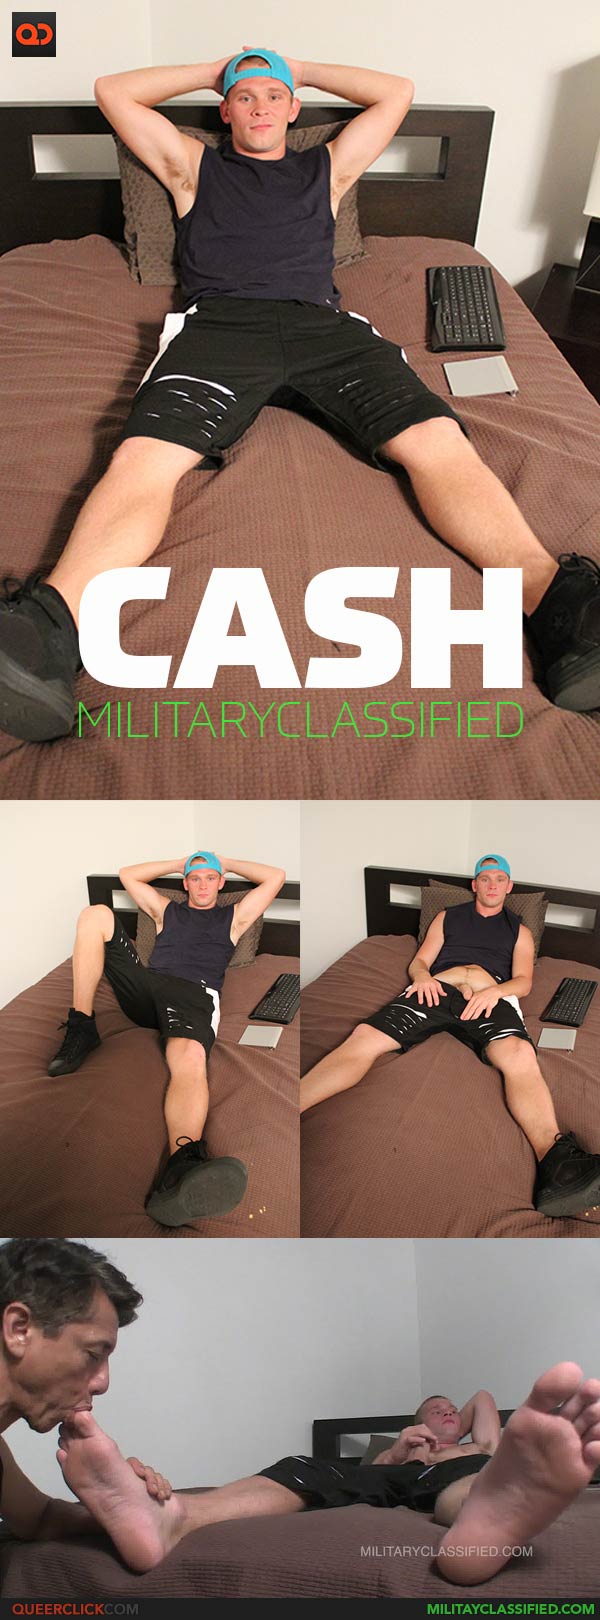 Military Classified: Cash